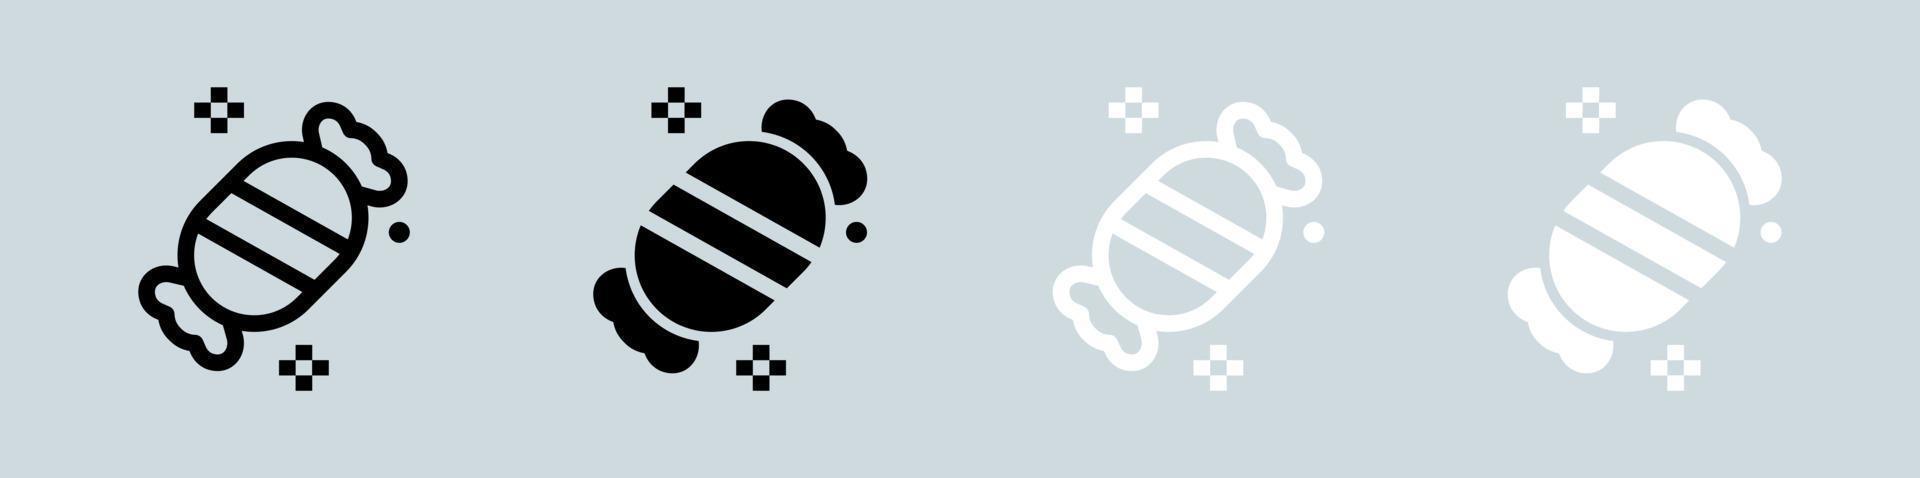 Candy icon set in black and white. Lollipop signs vector illustration.